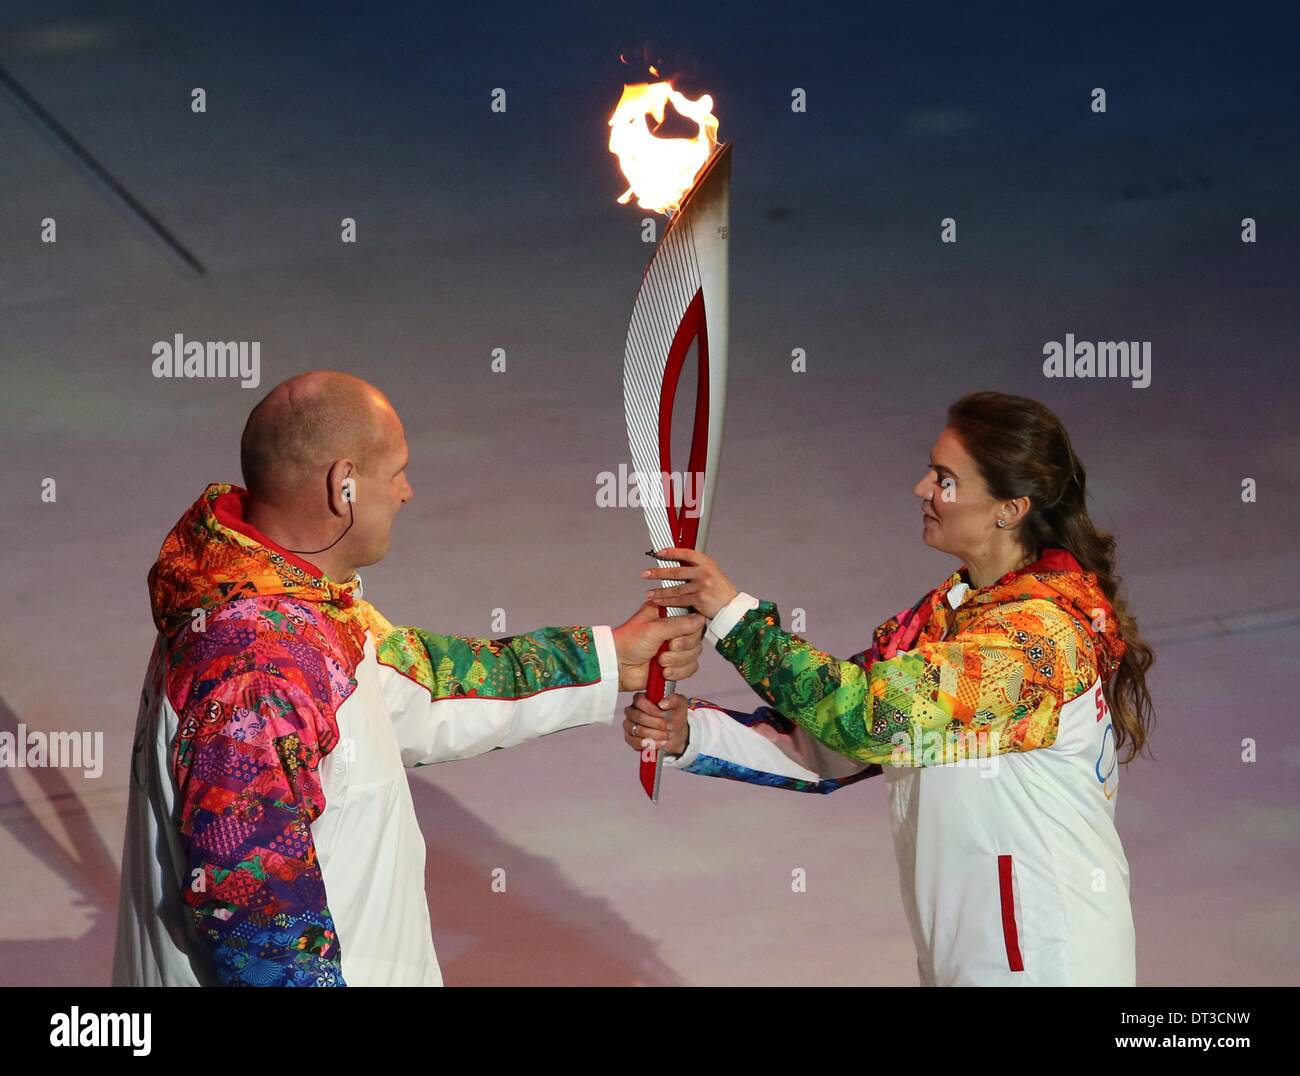 Sochi, Russia. 07 February 2014. Alexandr Karelin (L) receives the Olympic torch from Alina Kabaeva of Russia follow during the Opening Ceremony in Fisht Olympic Stadium at the Sochi 2014 Olympic Games, Sochi, Russia, 07 February 2014. Photo: Fredrik von Erichsen/dpa/Alamy Live News Stock Photo